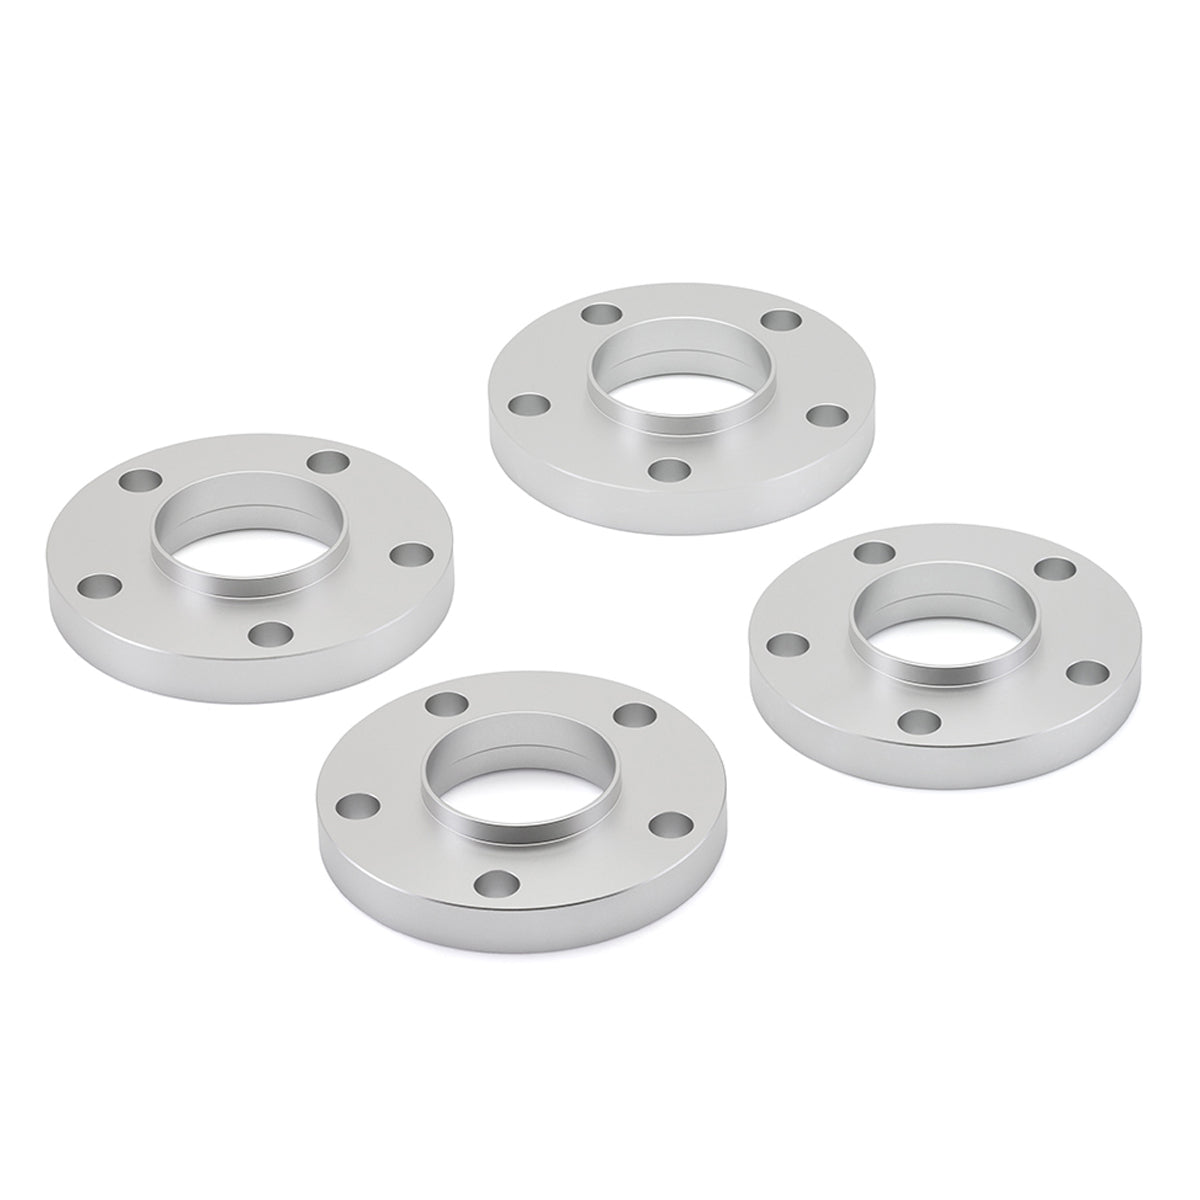 1988-2010 BMW 5 Series E34 5x120 Hubcentric Wheelcentric Wheel Spacers set of 4